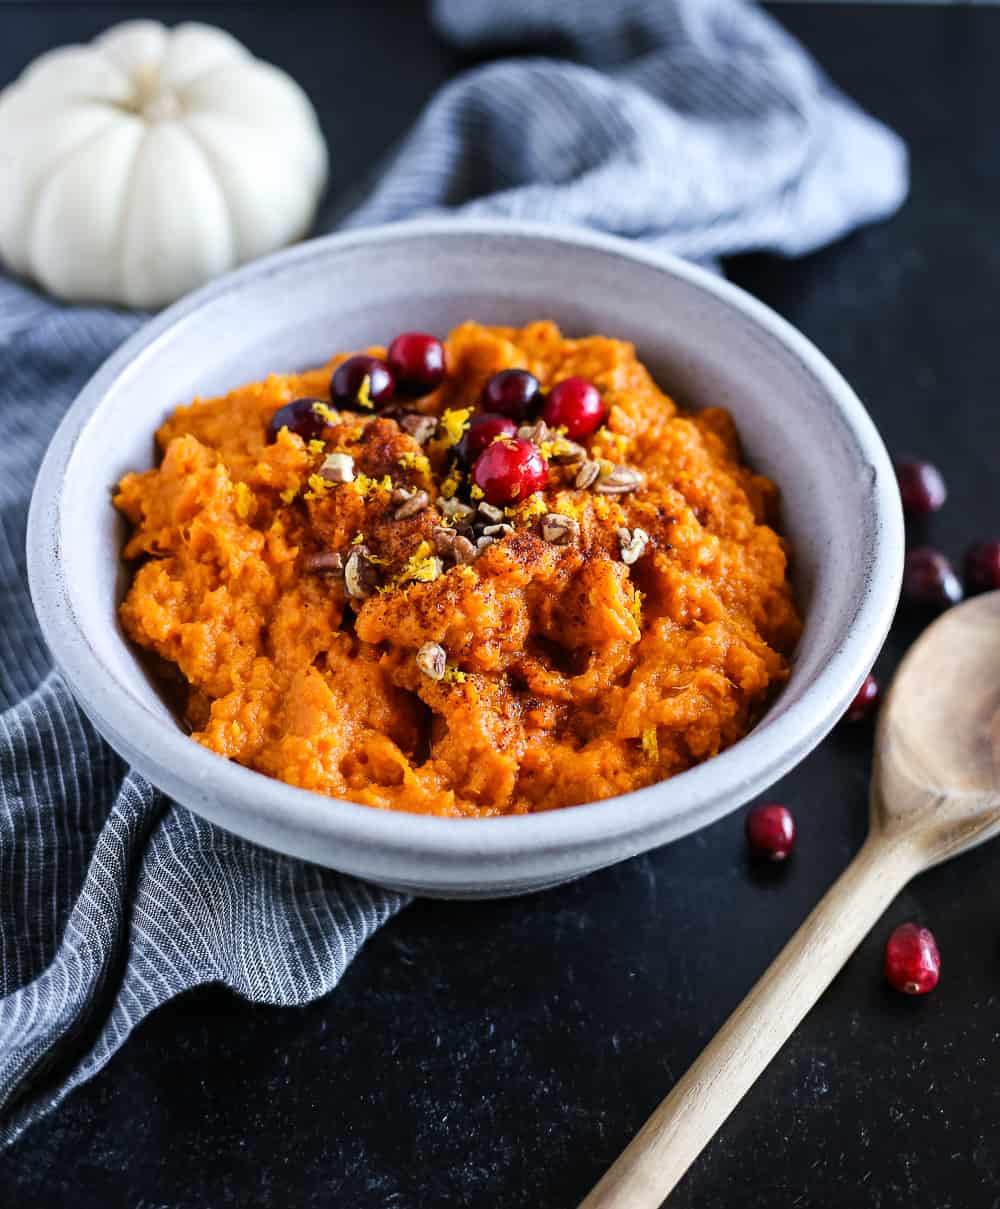 Mashed sweet potatoes in a pale blue ceramic serving bowl, garnished with chopped pecans and fresh cranberries on a black countertop